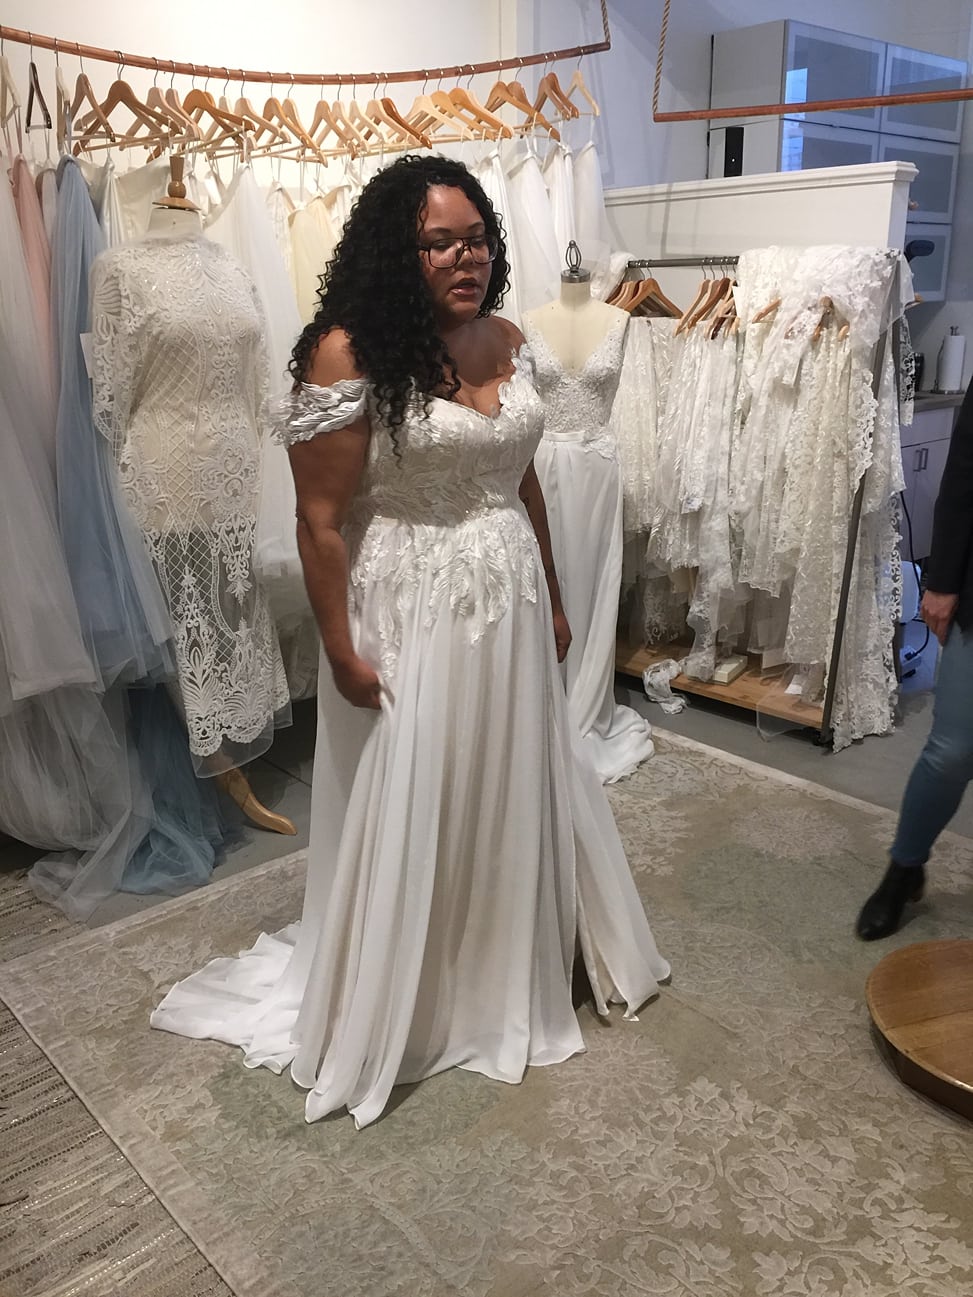 woman wearing glasses with black curly hair wears off the shoulder plus size lace bridal gown standing in front of other lace bridal dresses hanging on wooden hangers 